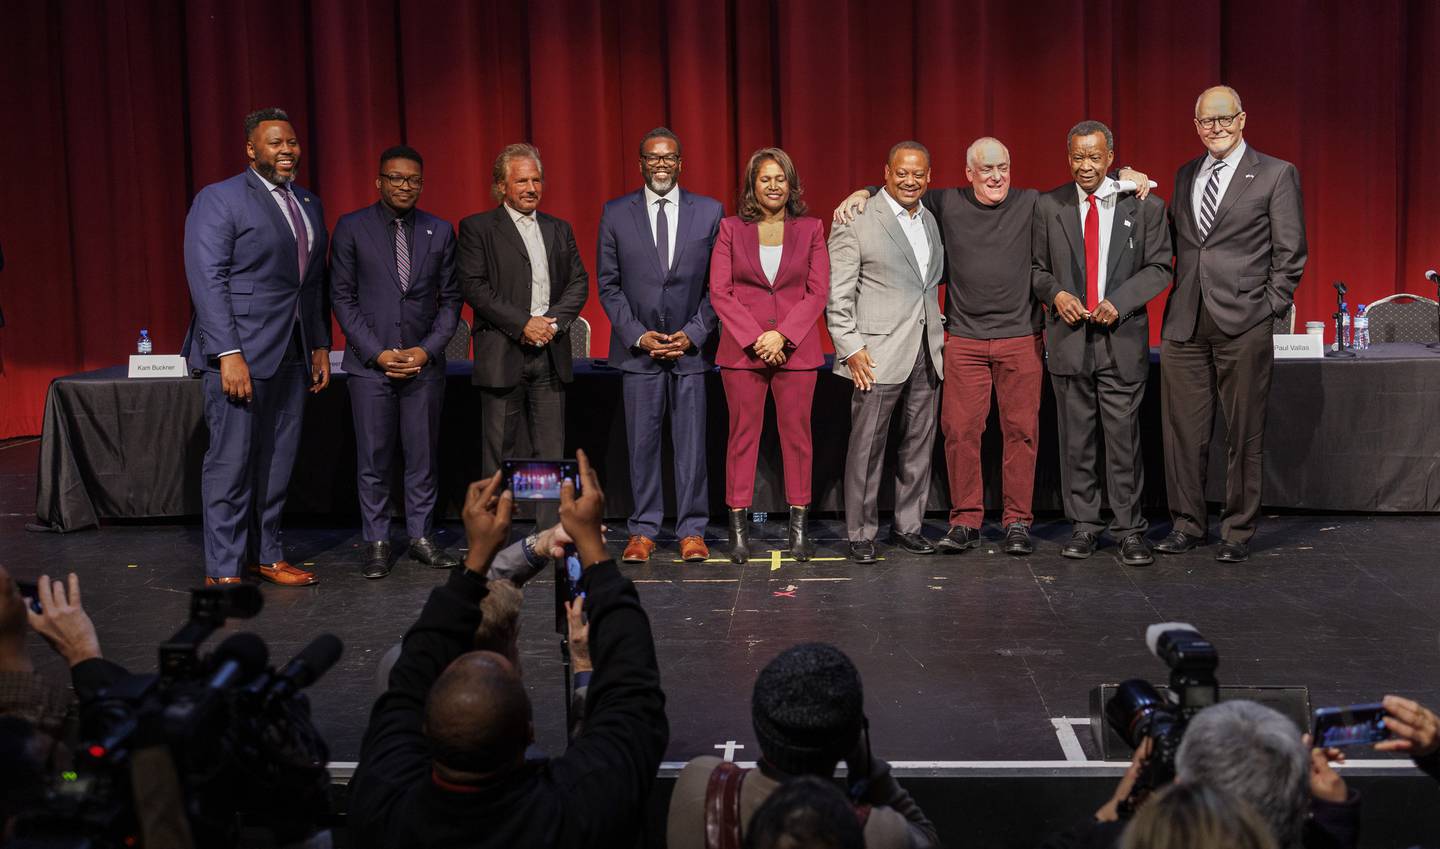 Chicago mayoral candidates, from left, state Rep. Kam Buckner; Ja’Mal Green; Johnny Logalbo; Cook County Commissioner Brandon Johnson; Ald. Sophia King, 4th; Ald. Roderick Sawyer, 6th; forum moderator Ben Joravsky; Willie Wilson; and Paul Vallas, pose for photographs at a forum hosted by the 38th Ward Democratic Organization at the Copernicus Center on Dec. 13, 2022.